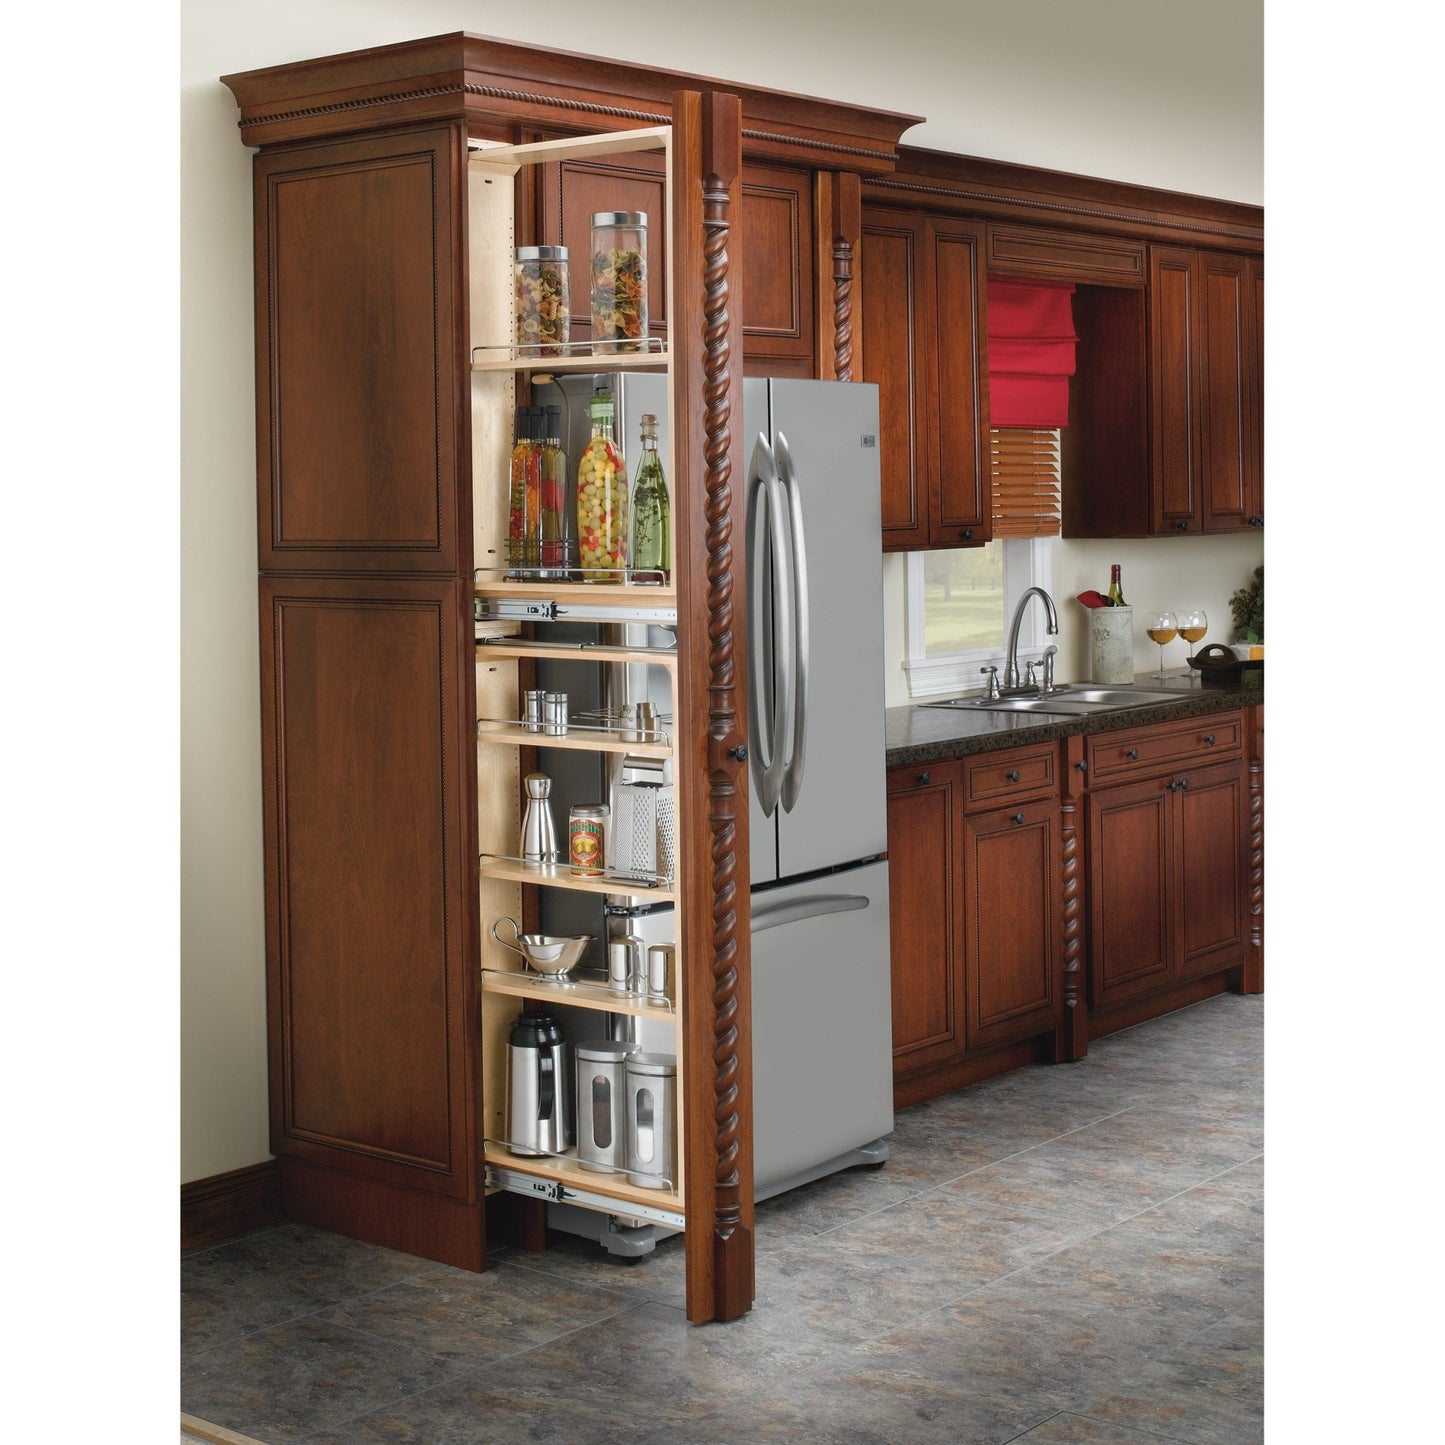 Rev-A-Shelf - Wood Tall Filler Pull Out Organizer for New Kitchen Applications - 432-TF39-6C